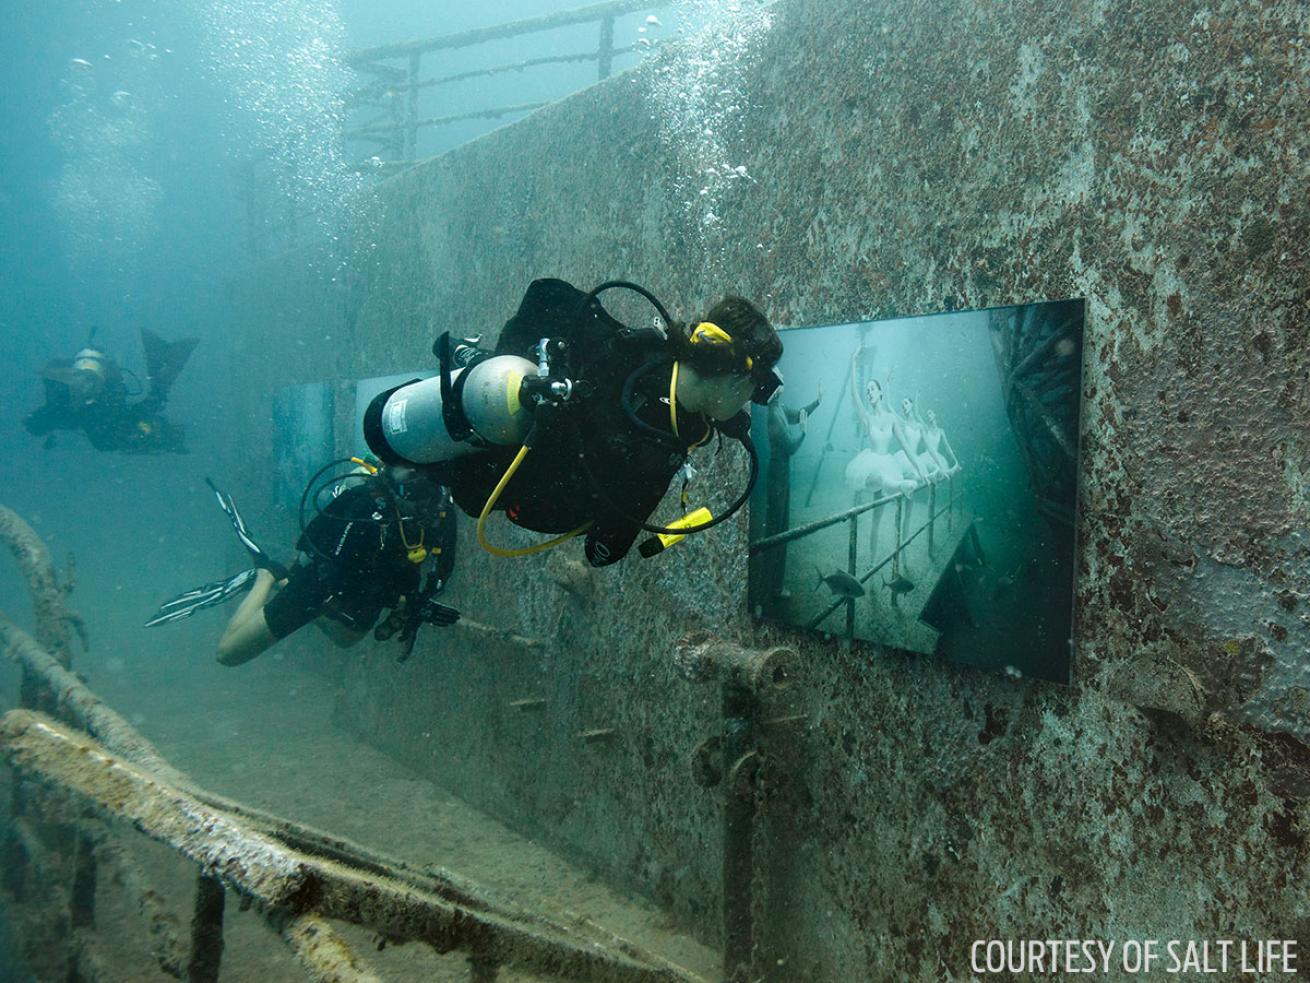 Underwater art exhibit to be attached to the USNS Vadengerg